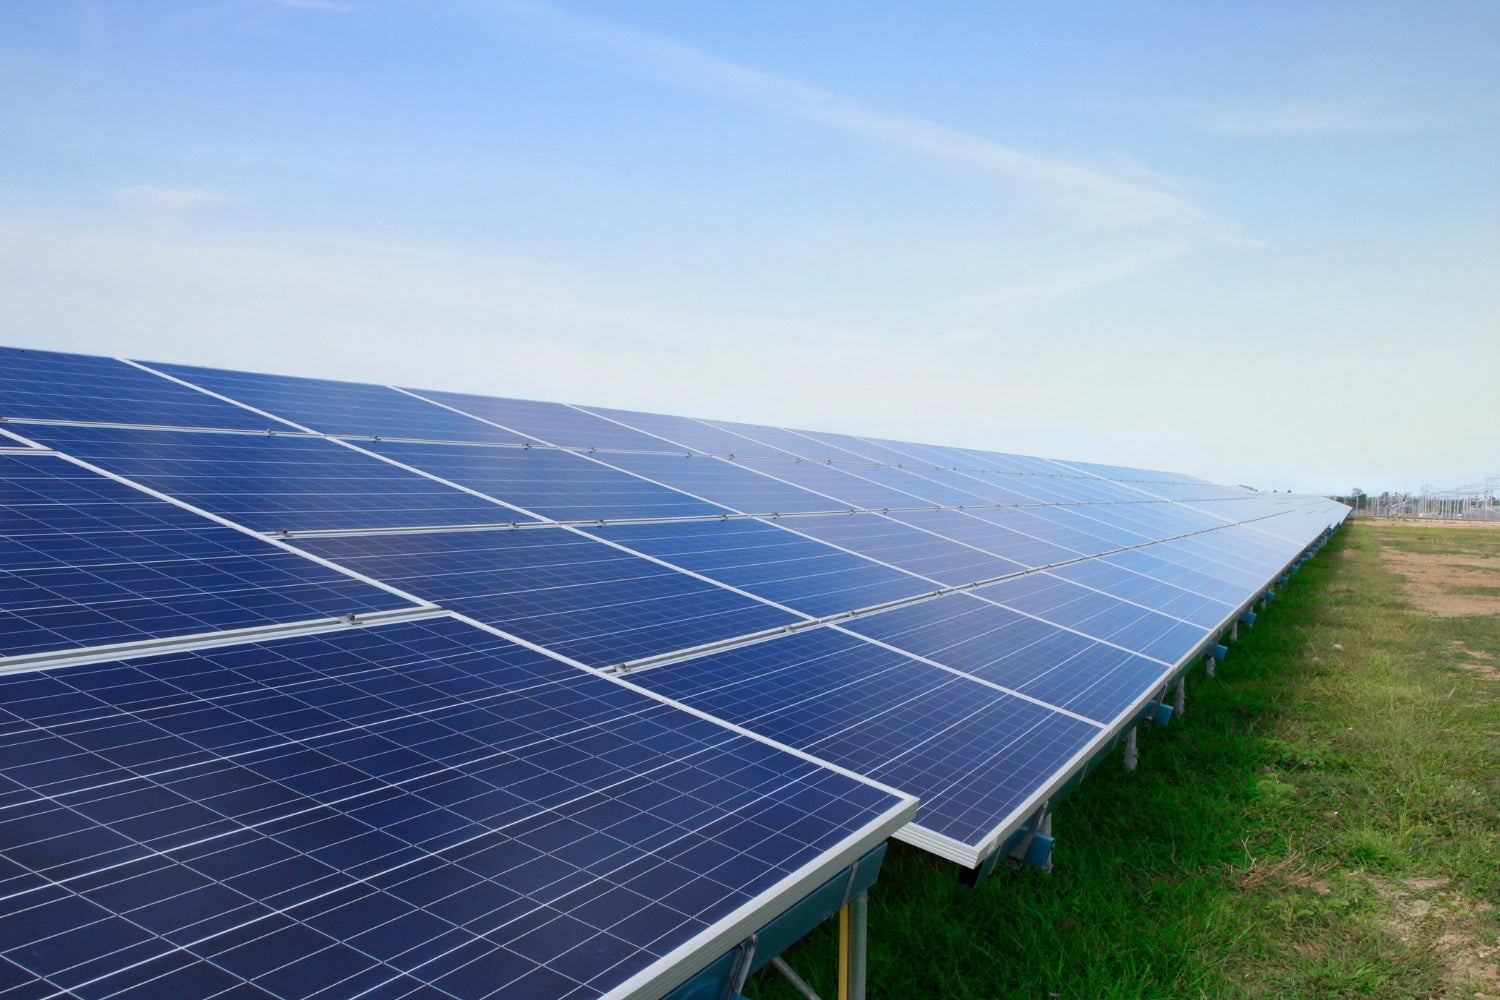 Ecoright Solar Panels - Harnessing Clean, Renewable Energy to Power Our Eco-Friendly Facilities